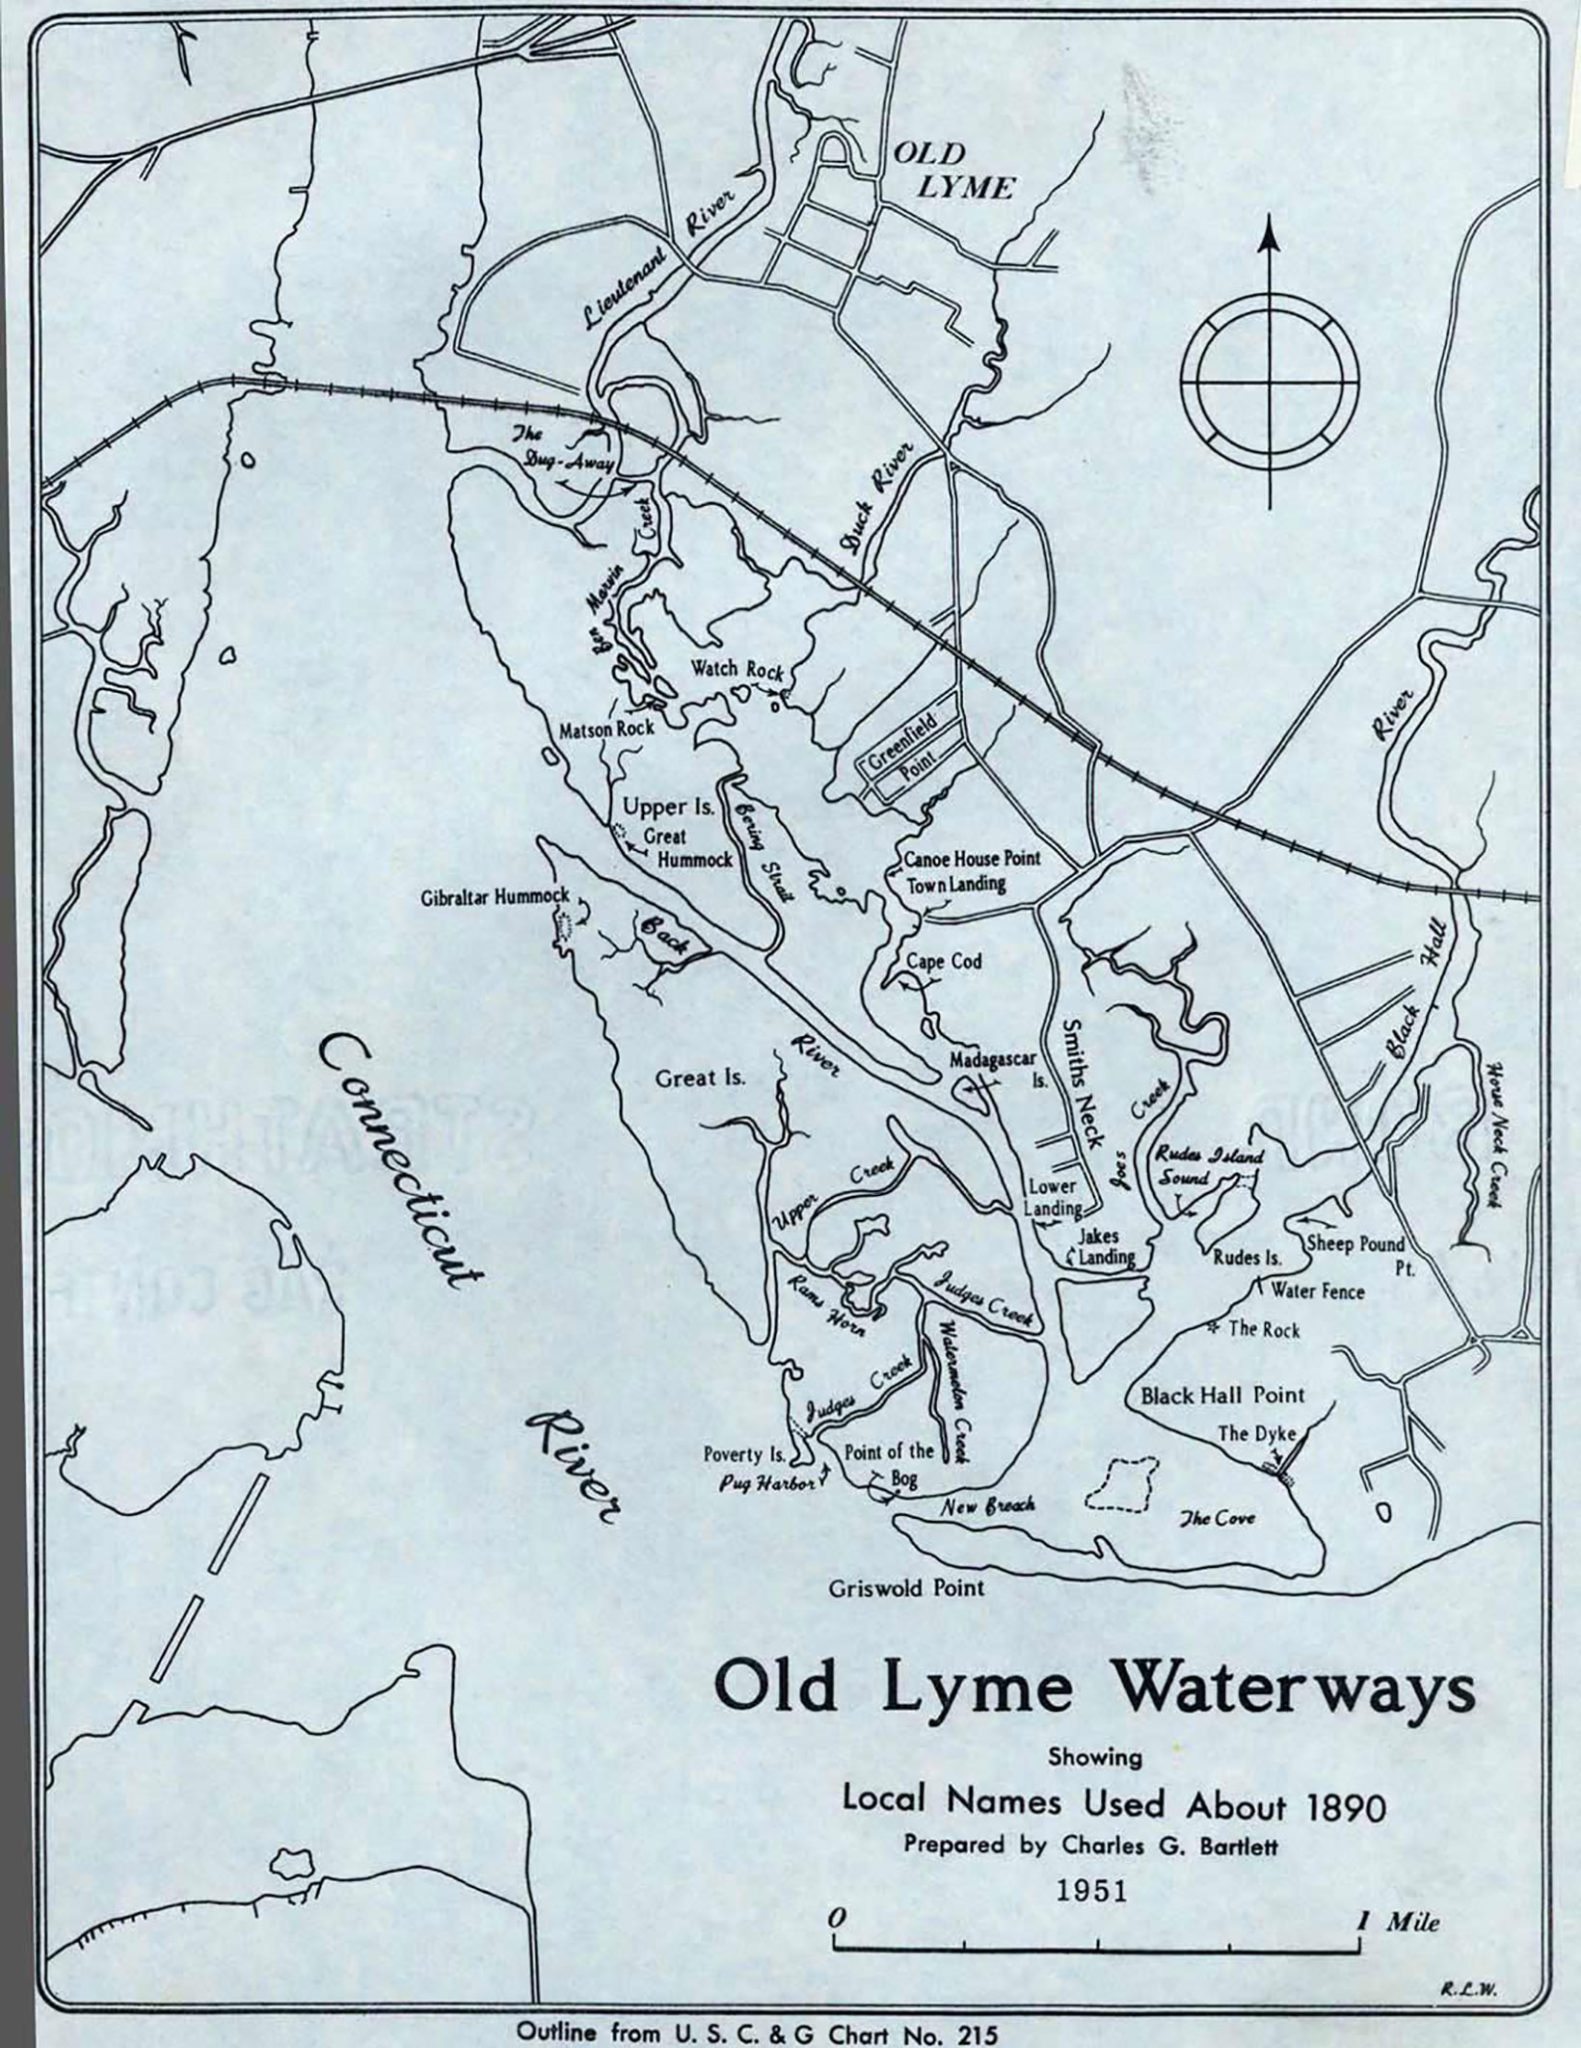 Documents: Map of Old Lyme Waterways